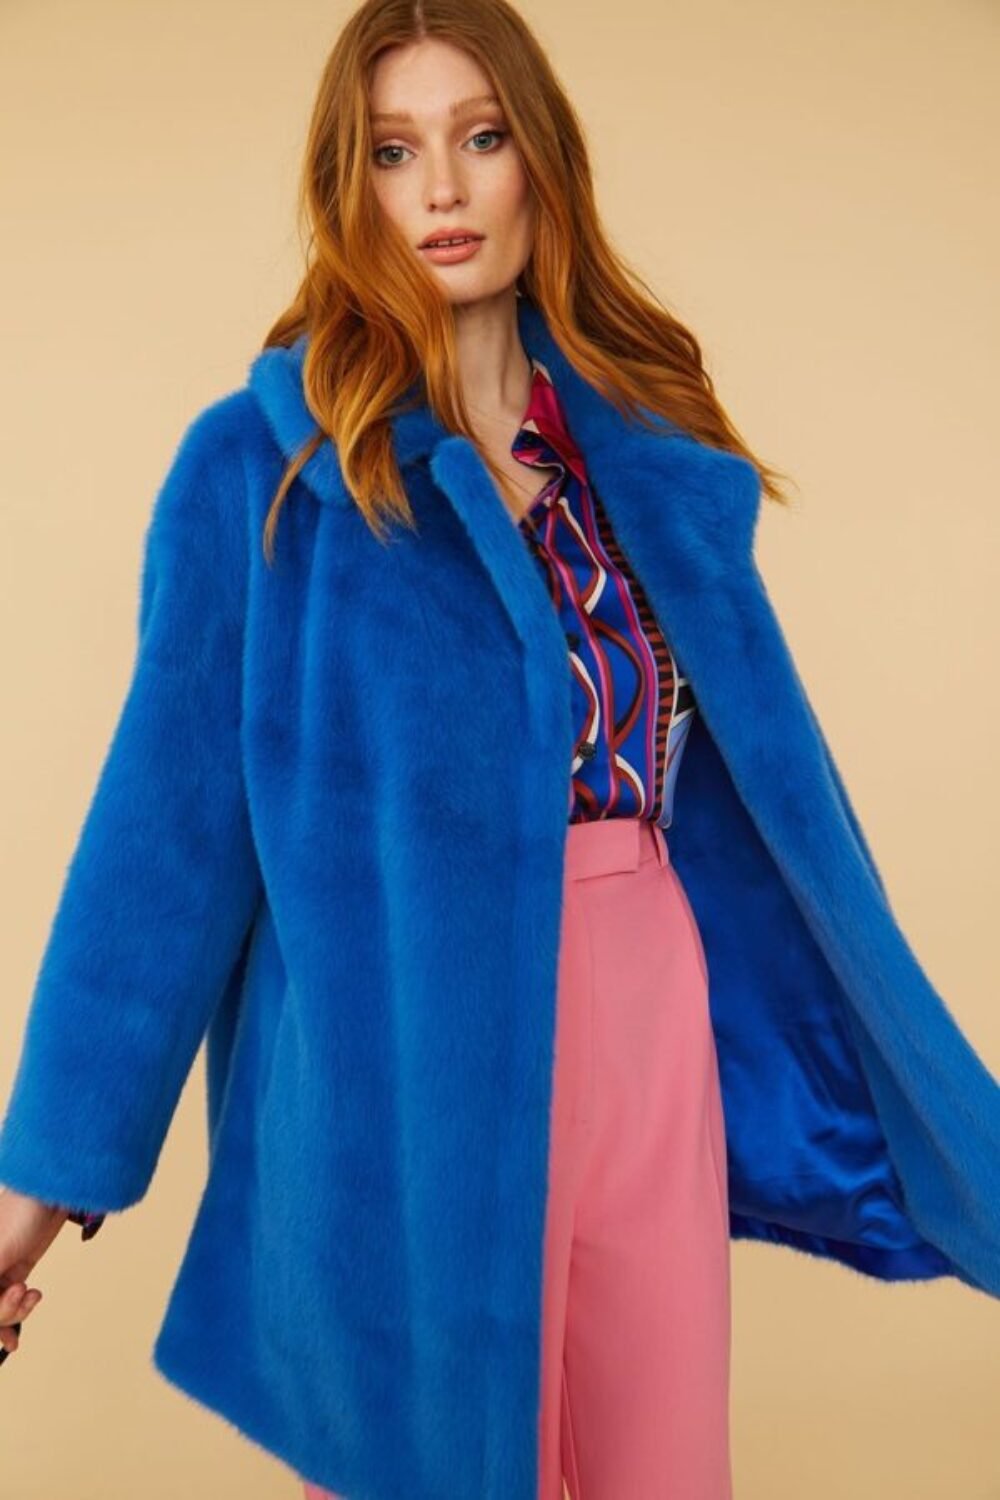 Shop Lux Blue Faux Fur Duchess Midi Coat and women's luxury and designer clothes at www.lux-apparel.co.uk